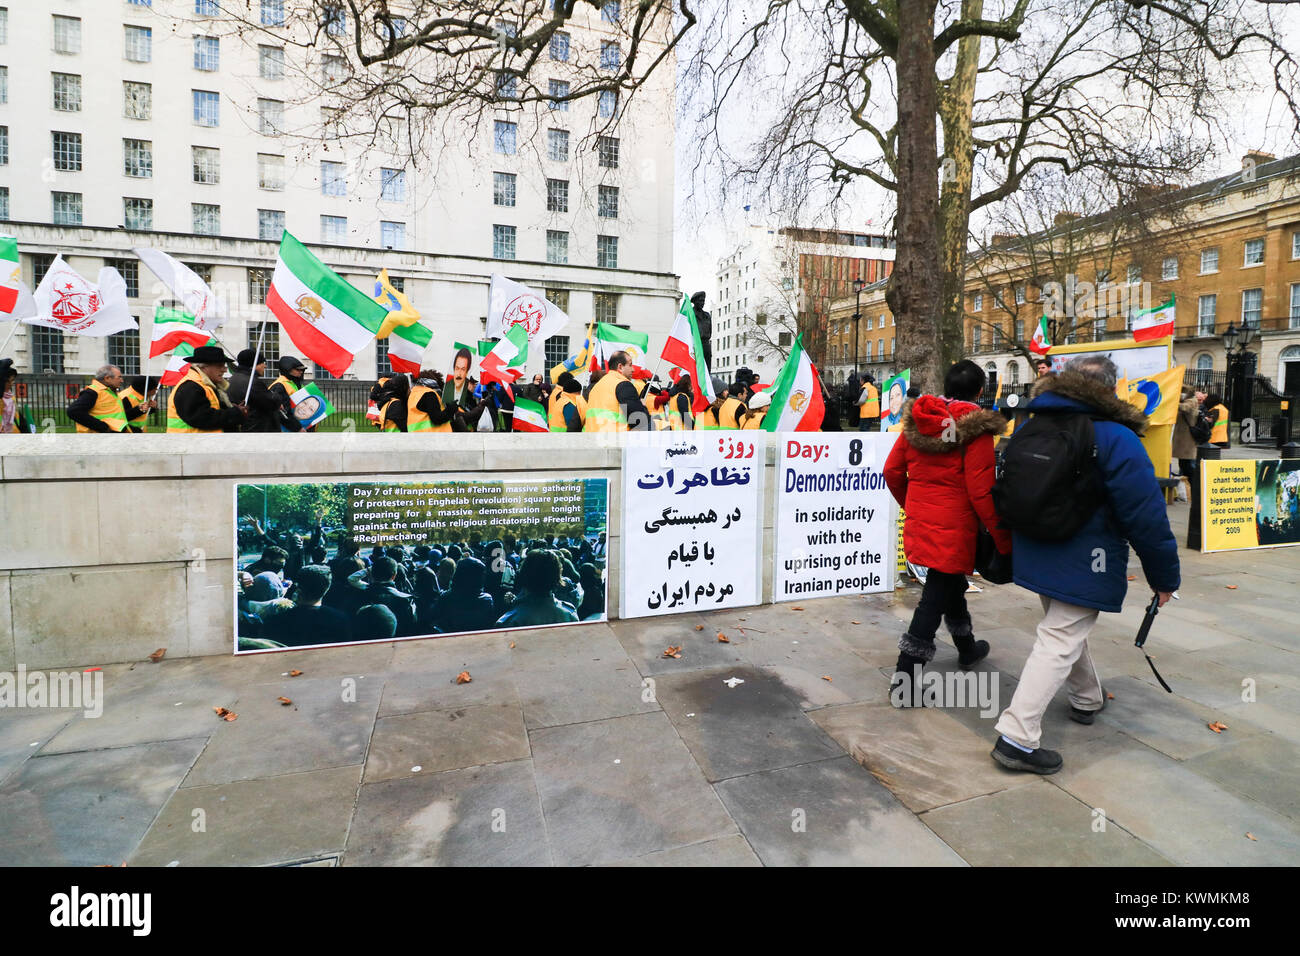 London, UK. 4th Jan, 2018. A rally outside No 10 Downing Street by members of Iran's opposition, the National Resistance of Iran (NCRI) and the People's Mojahedin Organization of Iran (PMOI/MEK)calling on the UK Government to break its silence and condemn the killings and crackdown of protesters by the Iranian clerical regime of President Rouhani and Supreme leader Ayatollah Ali Khamenei Credit: amer ghazzal/Alamy Live News Stock Photo